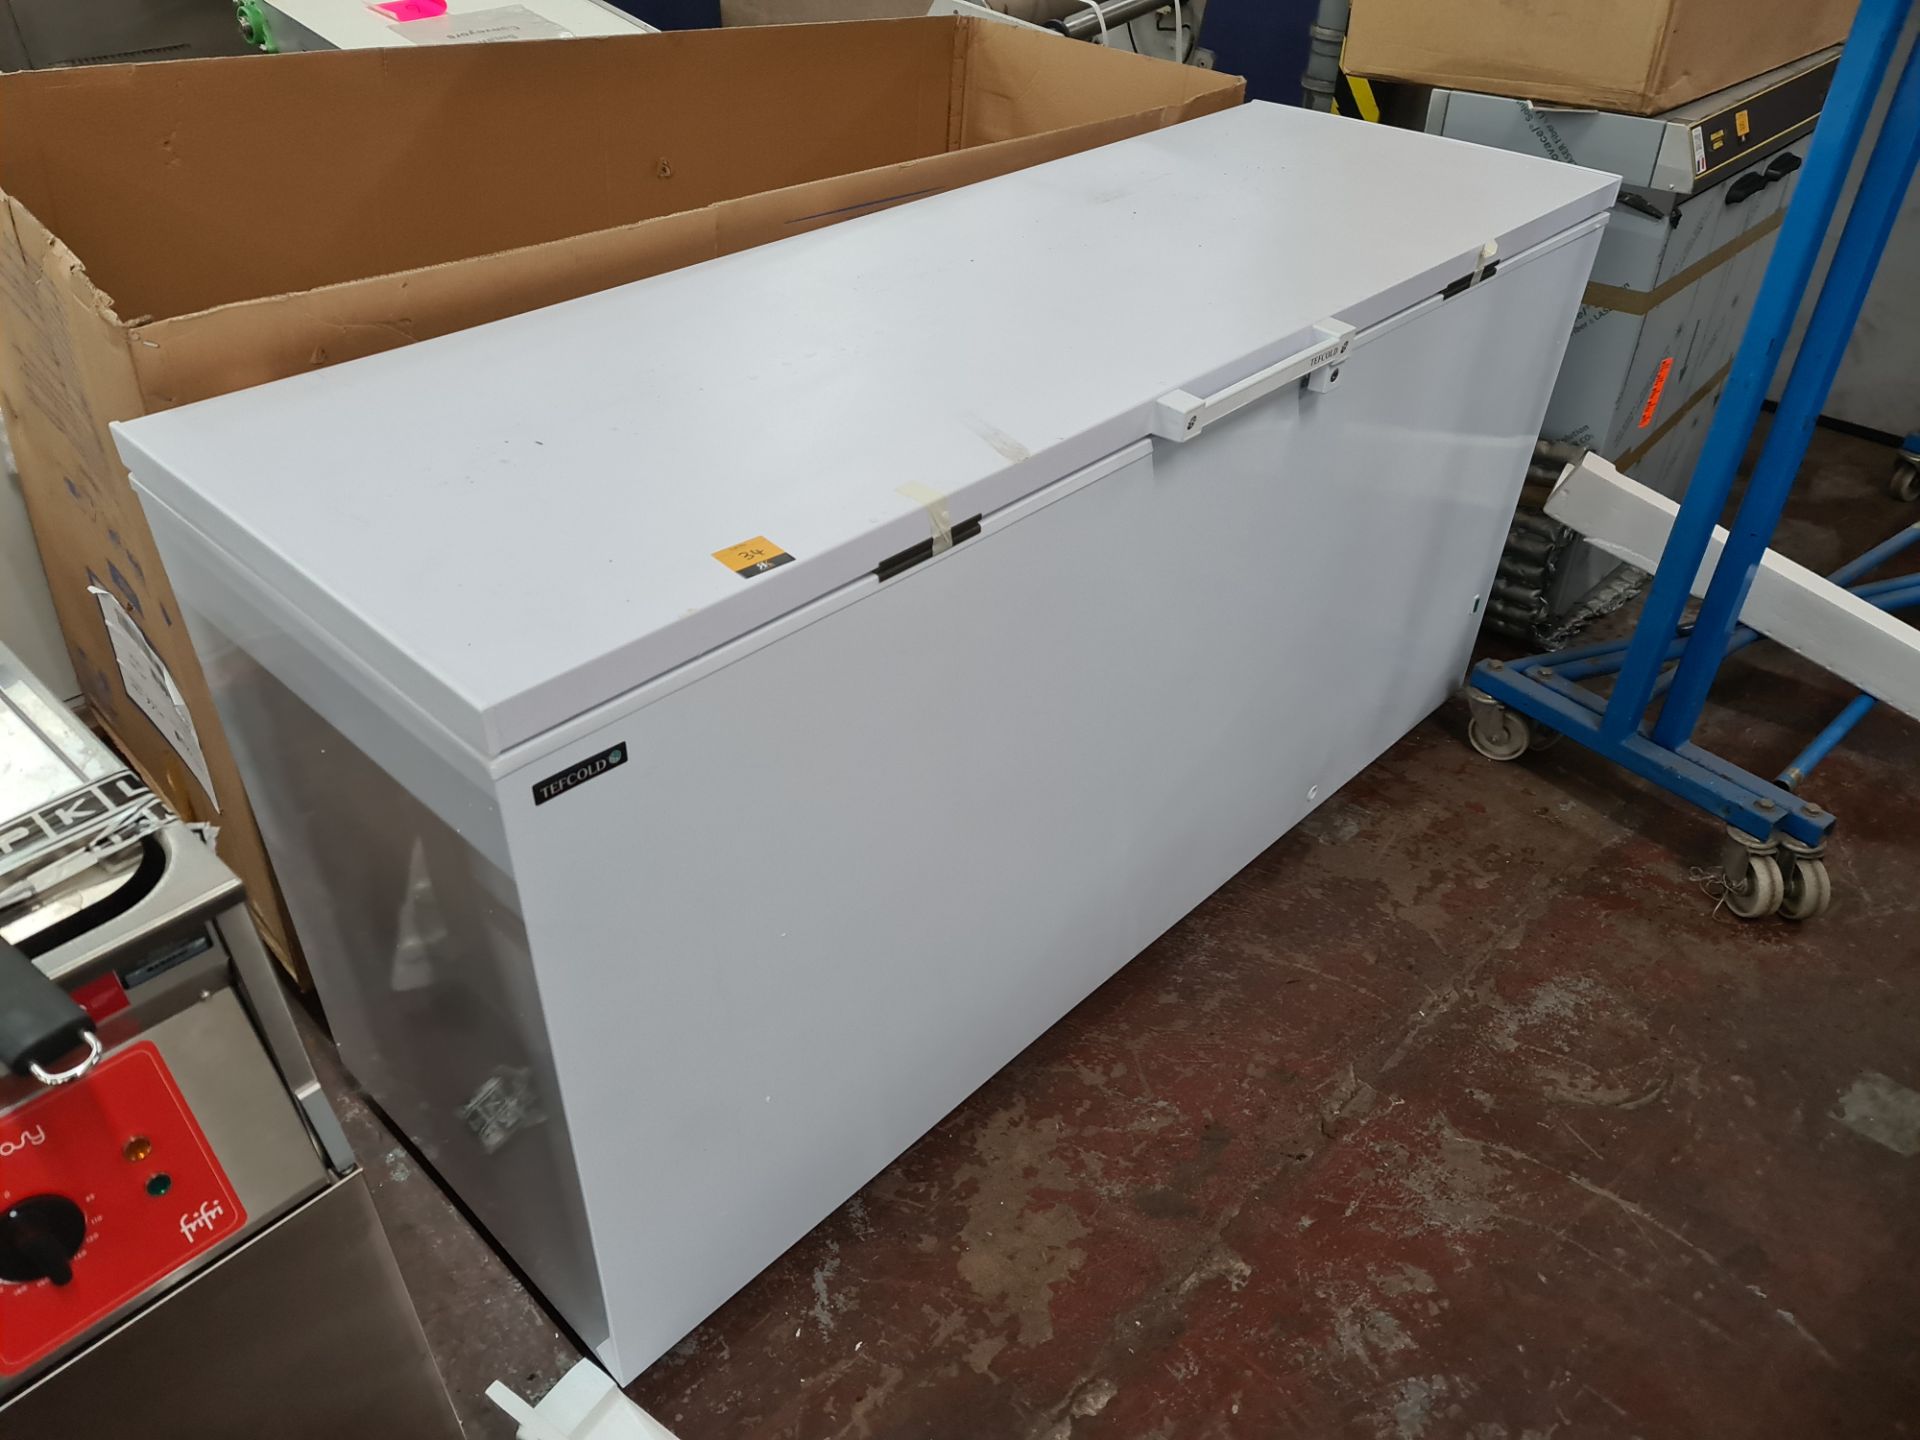 Tefcold 1.8 metre solid top chest freezer, model FR605SL, with 2 keys, appears new/unused. - Image 2 of 9